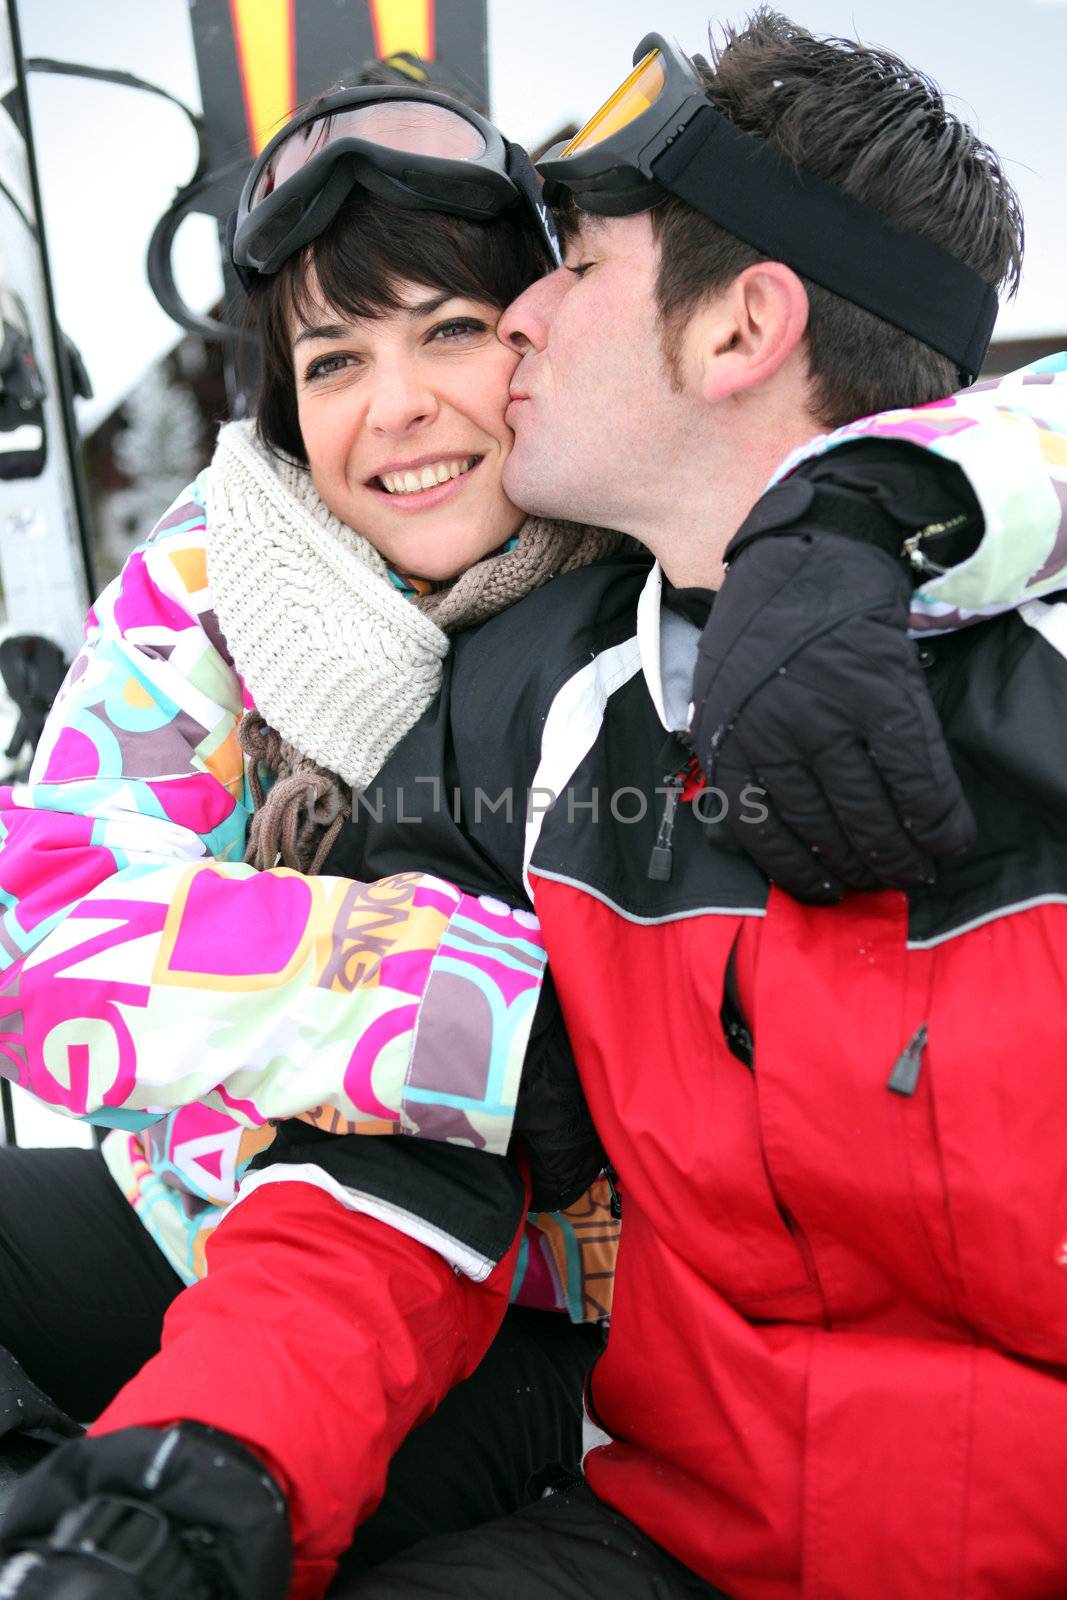 Couple on a romantic skiing holiday